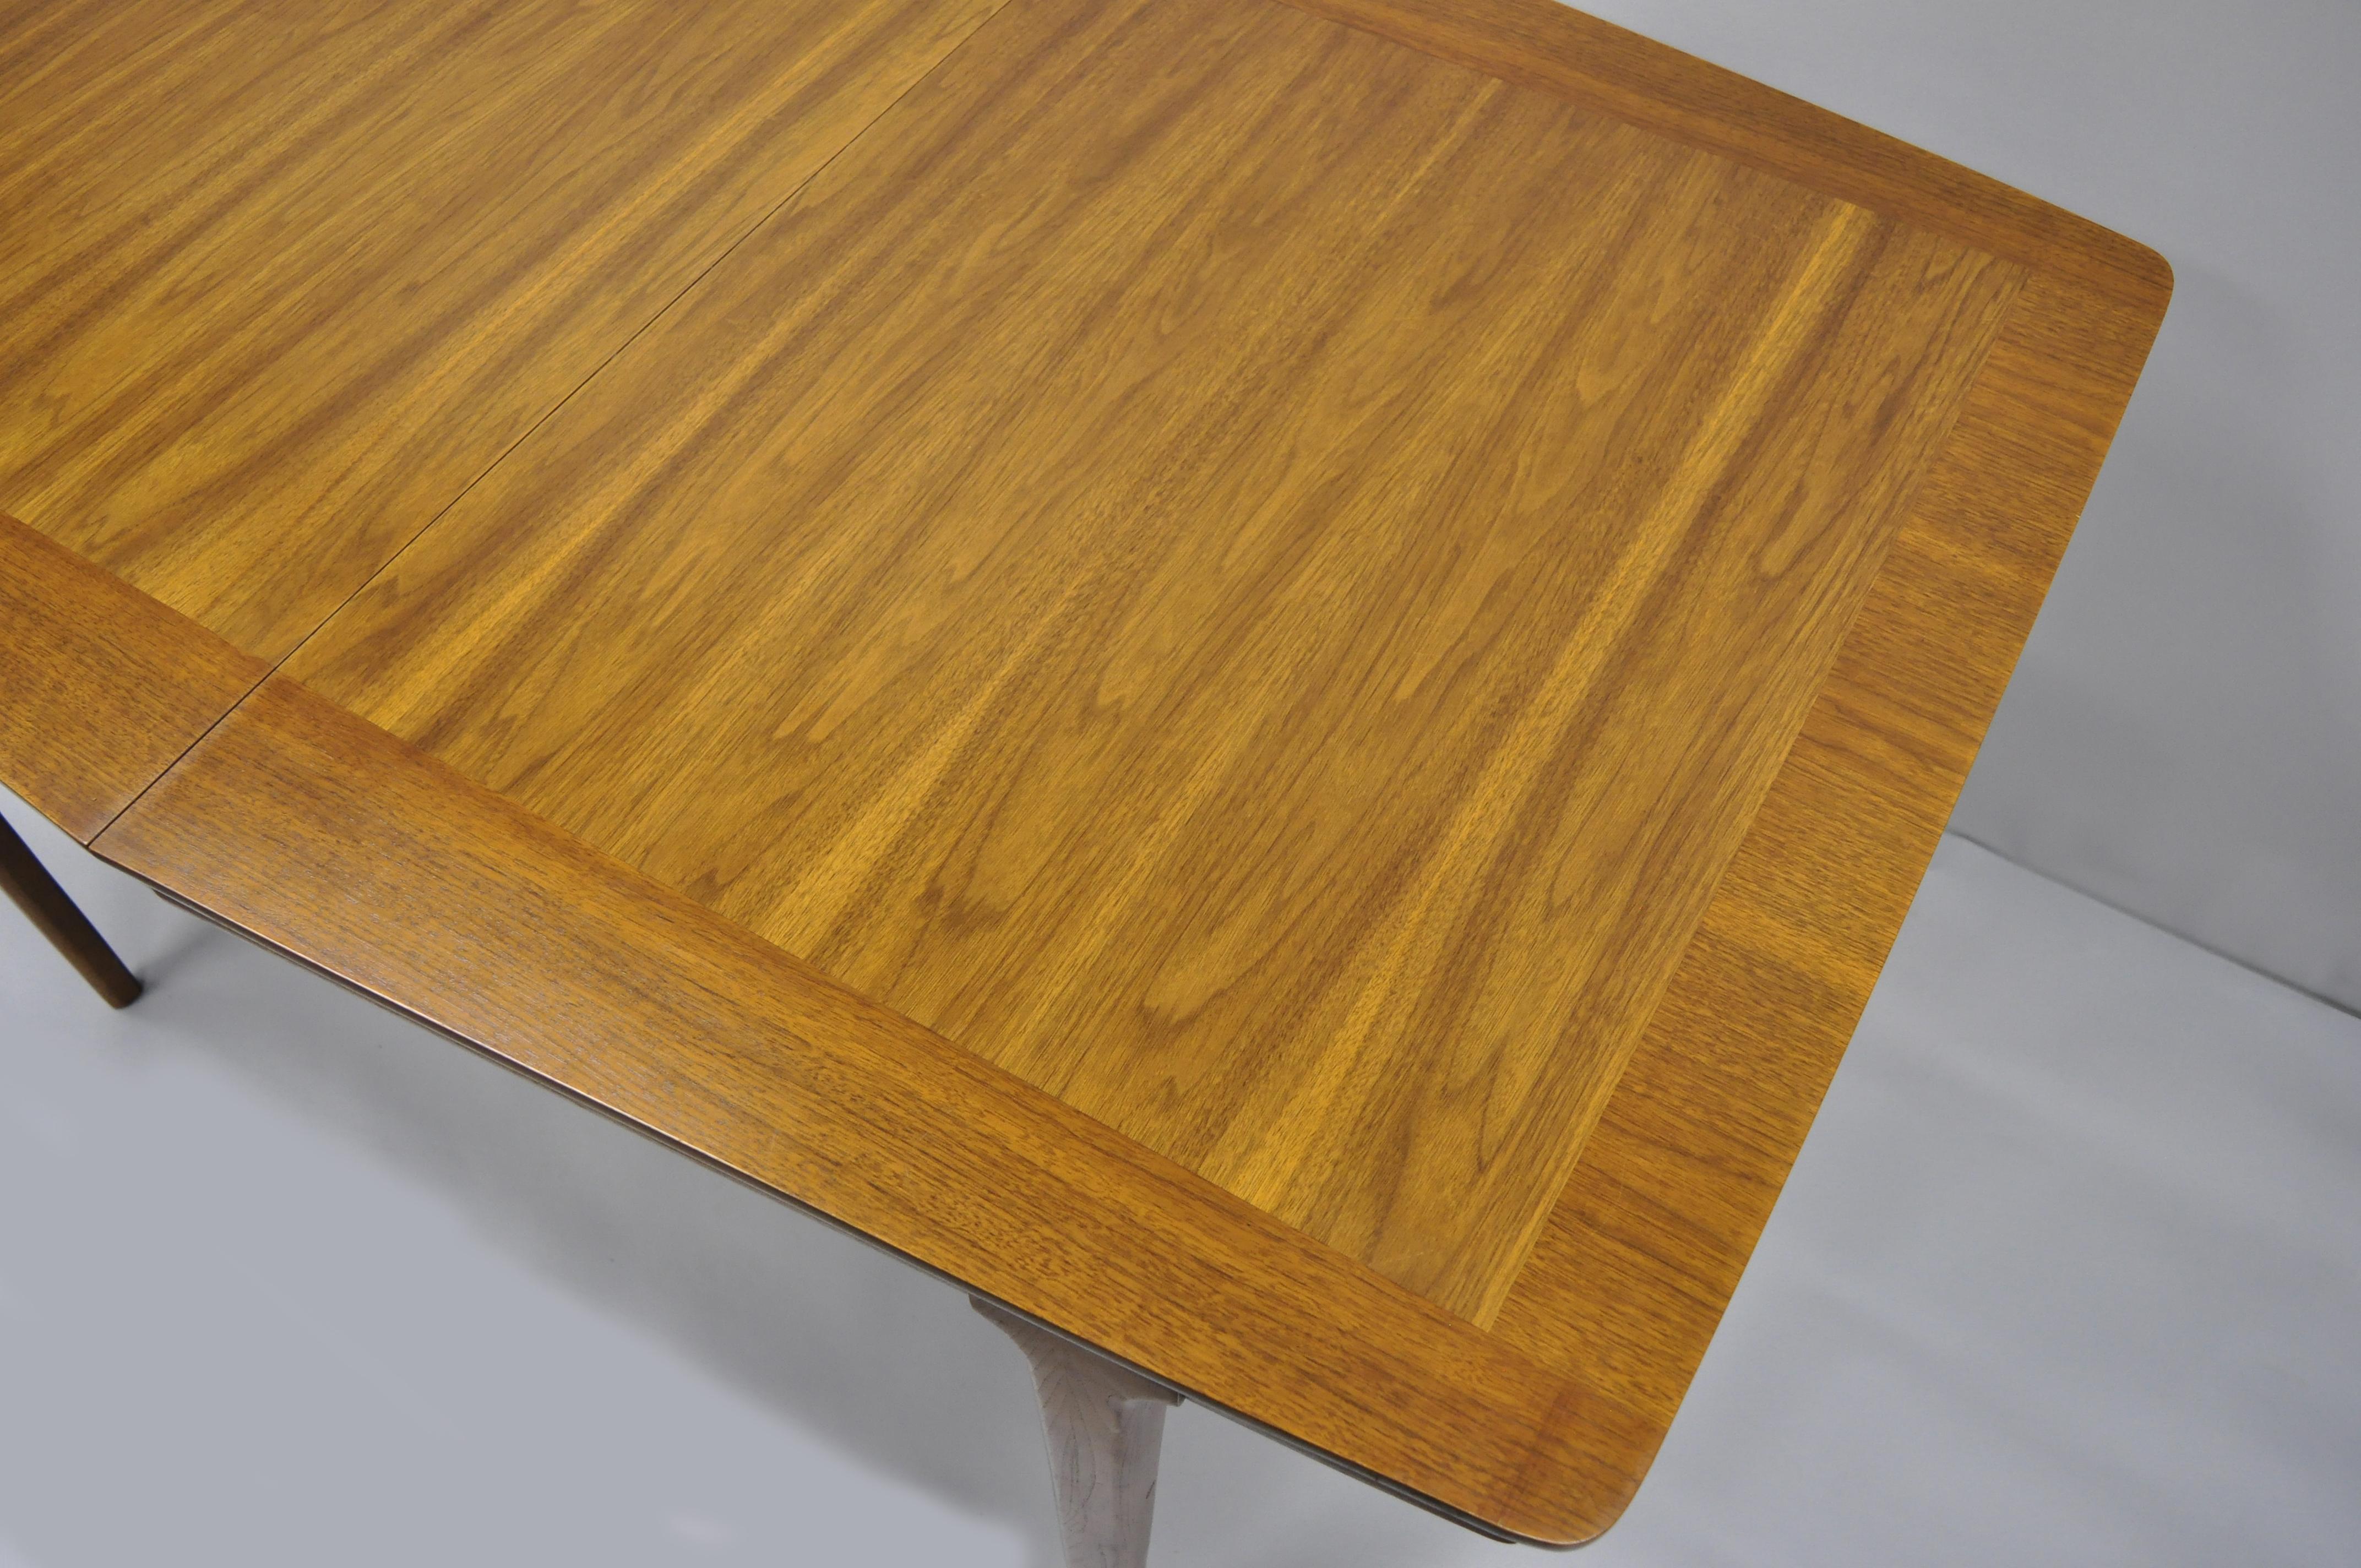 20th Century Mid-Century Modern Danish Walnut Sculpted Edge Dining Table with 1 Leaf